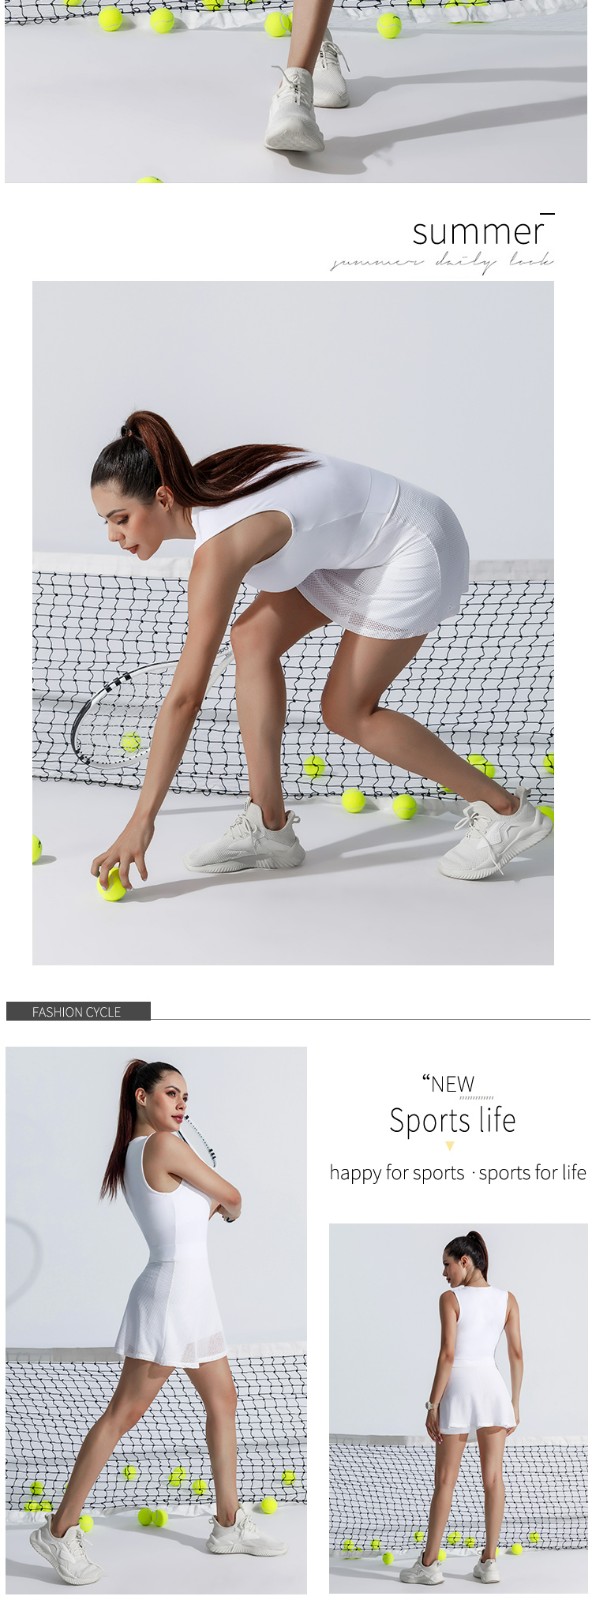 custom tennis outfit woman for sport-5